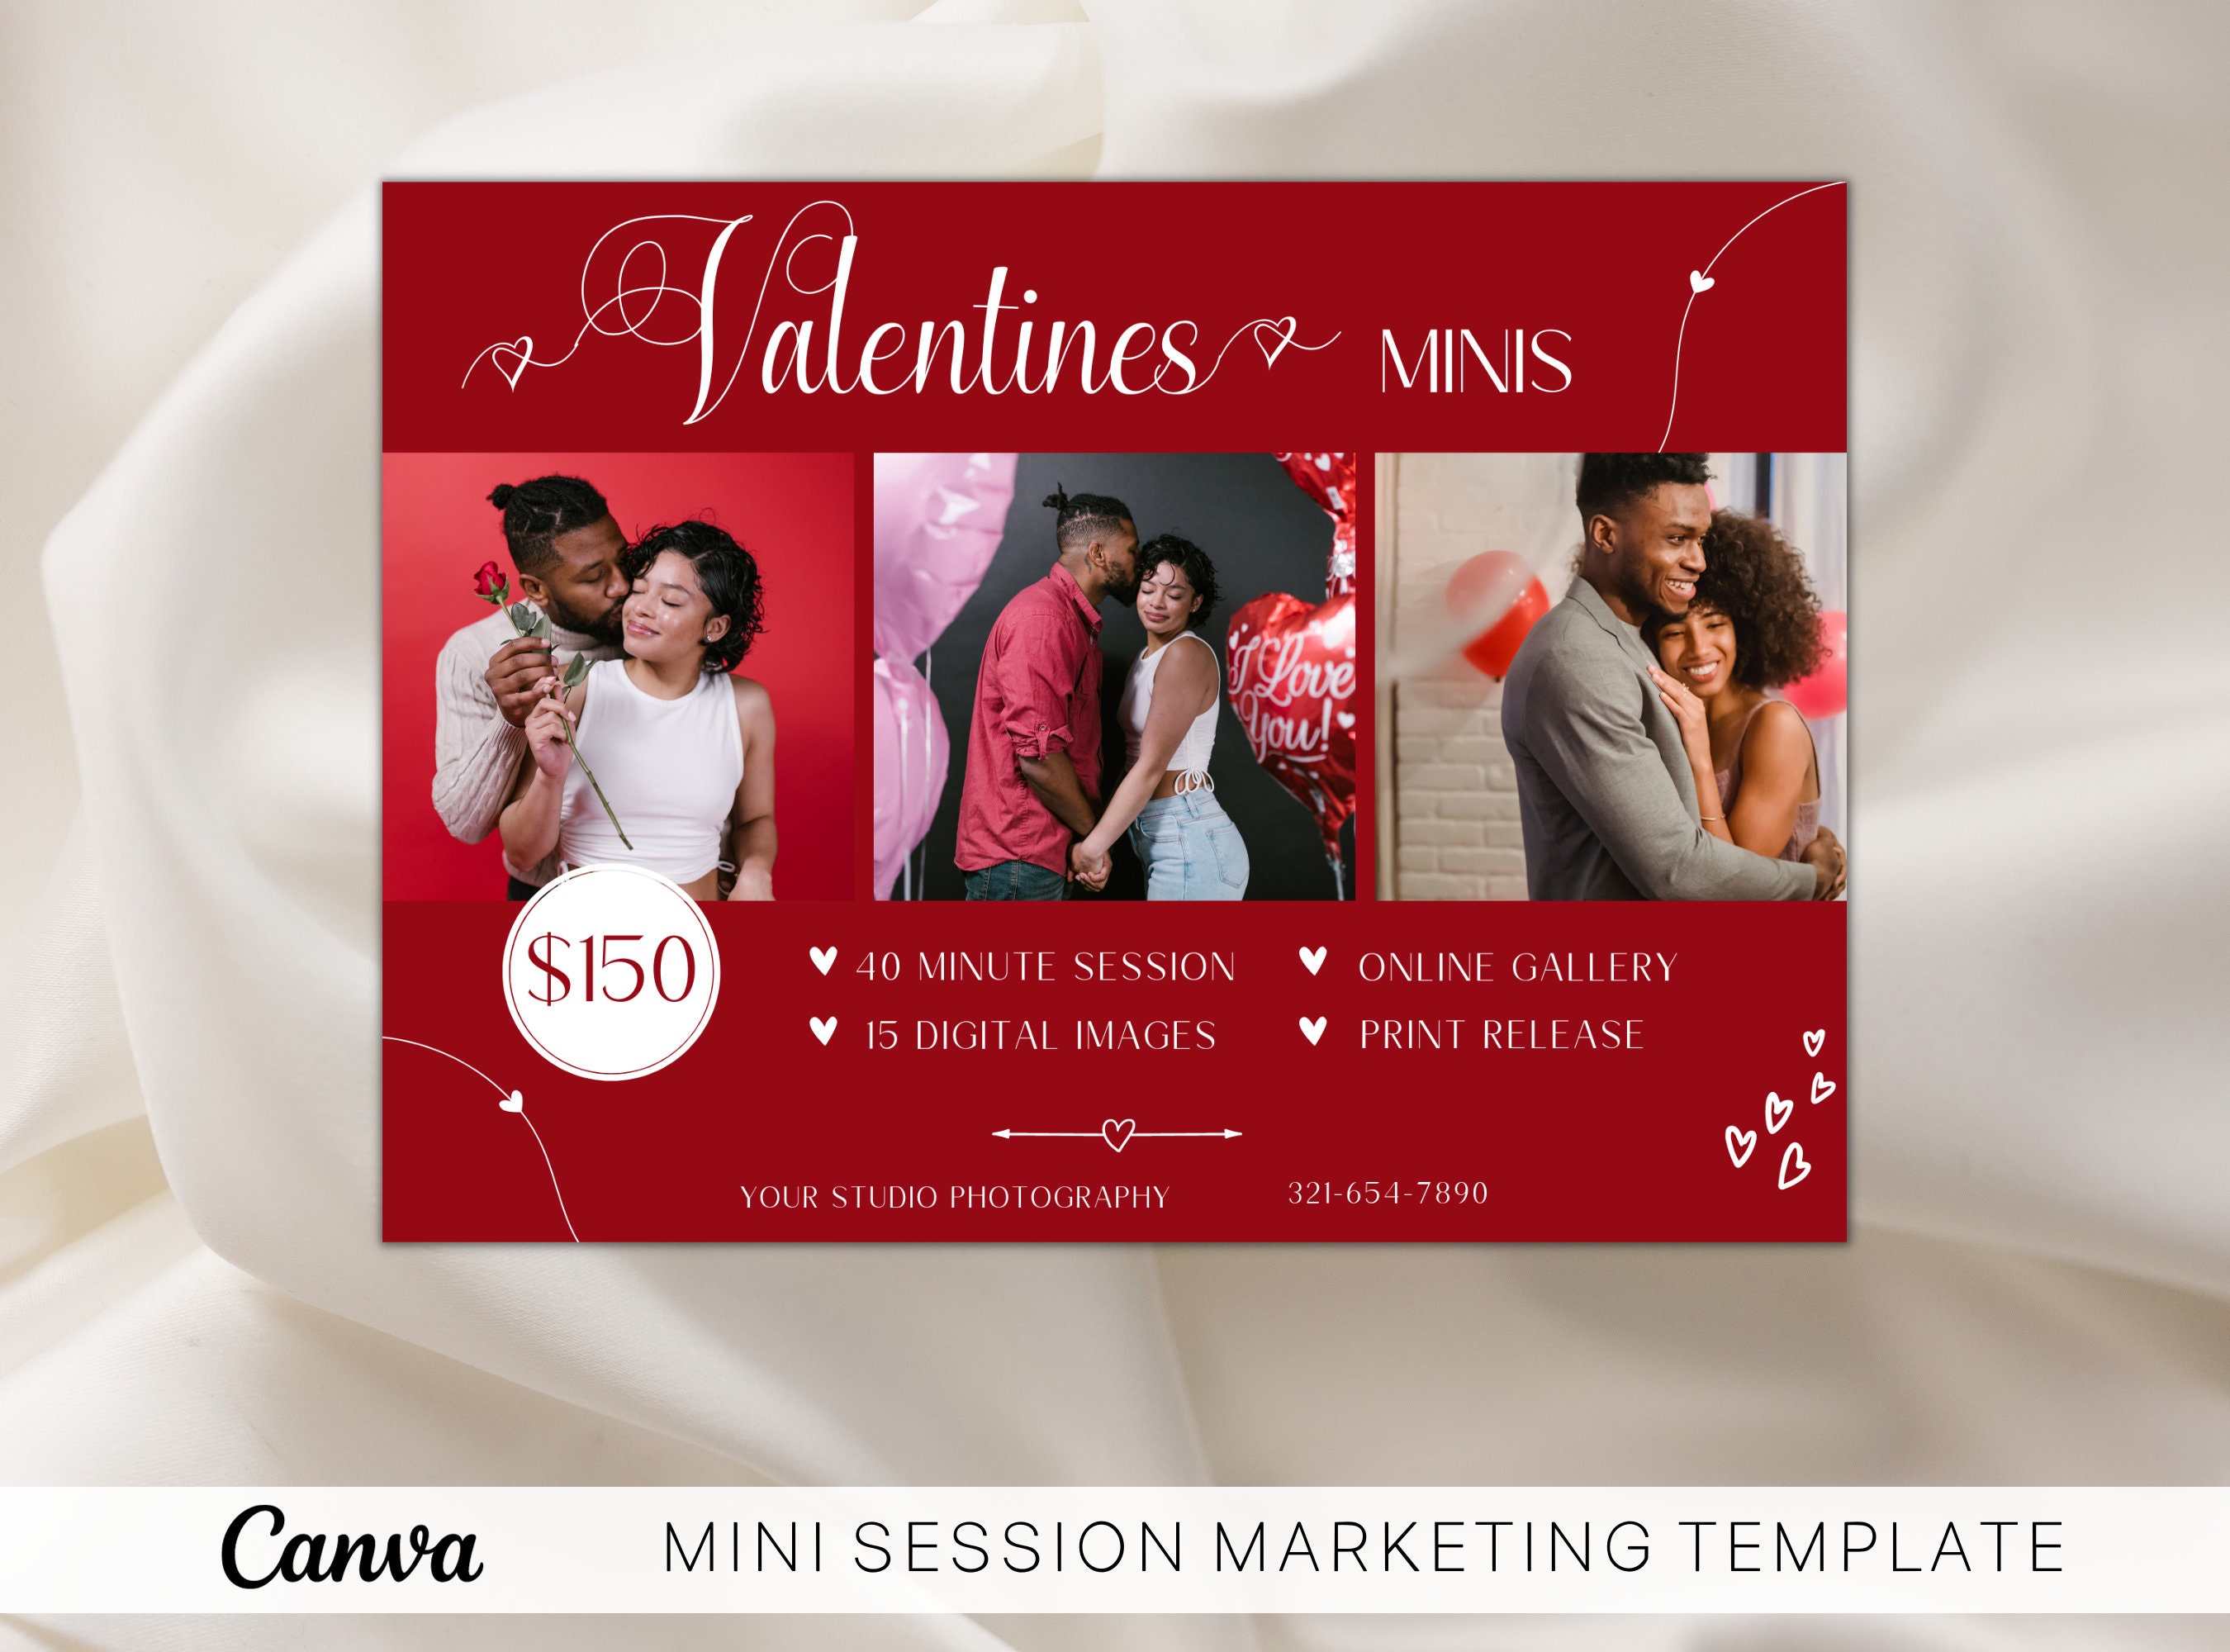 Create Valentine's Day Flyers In Minutes!